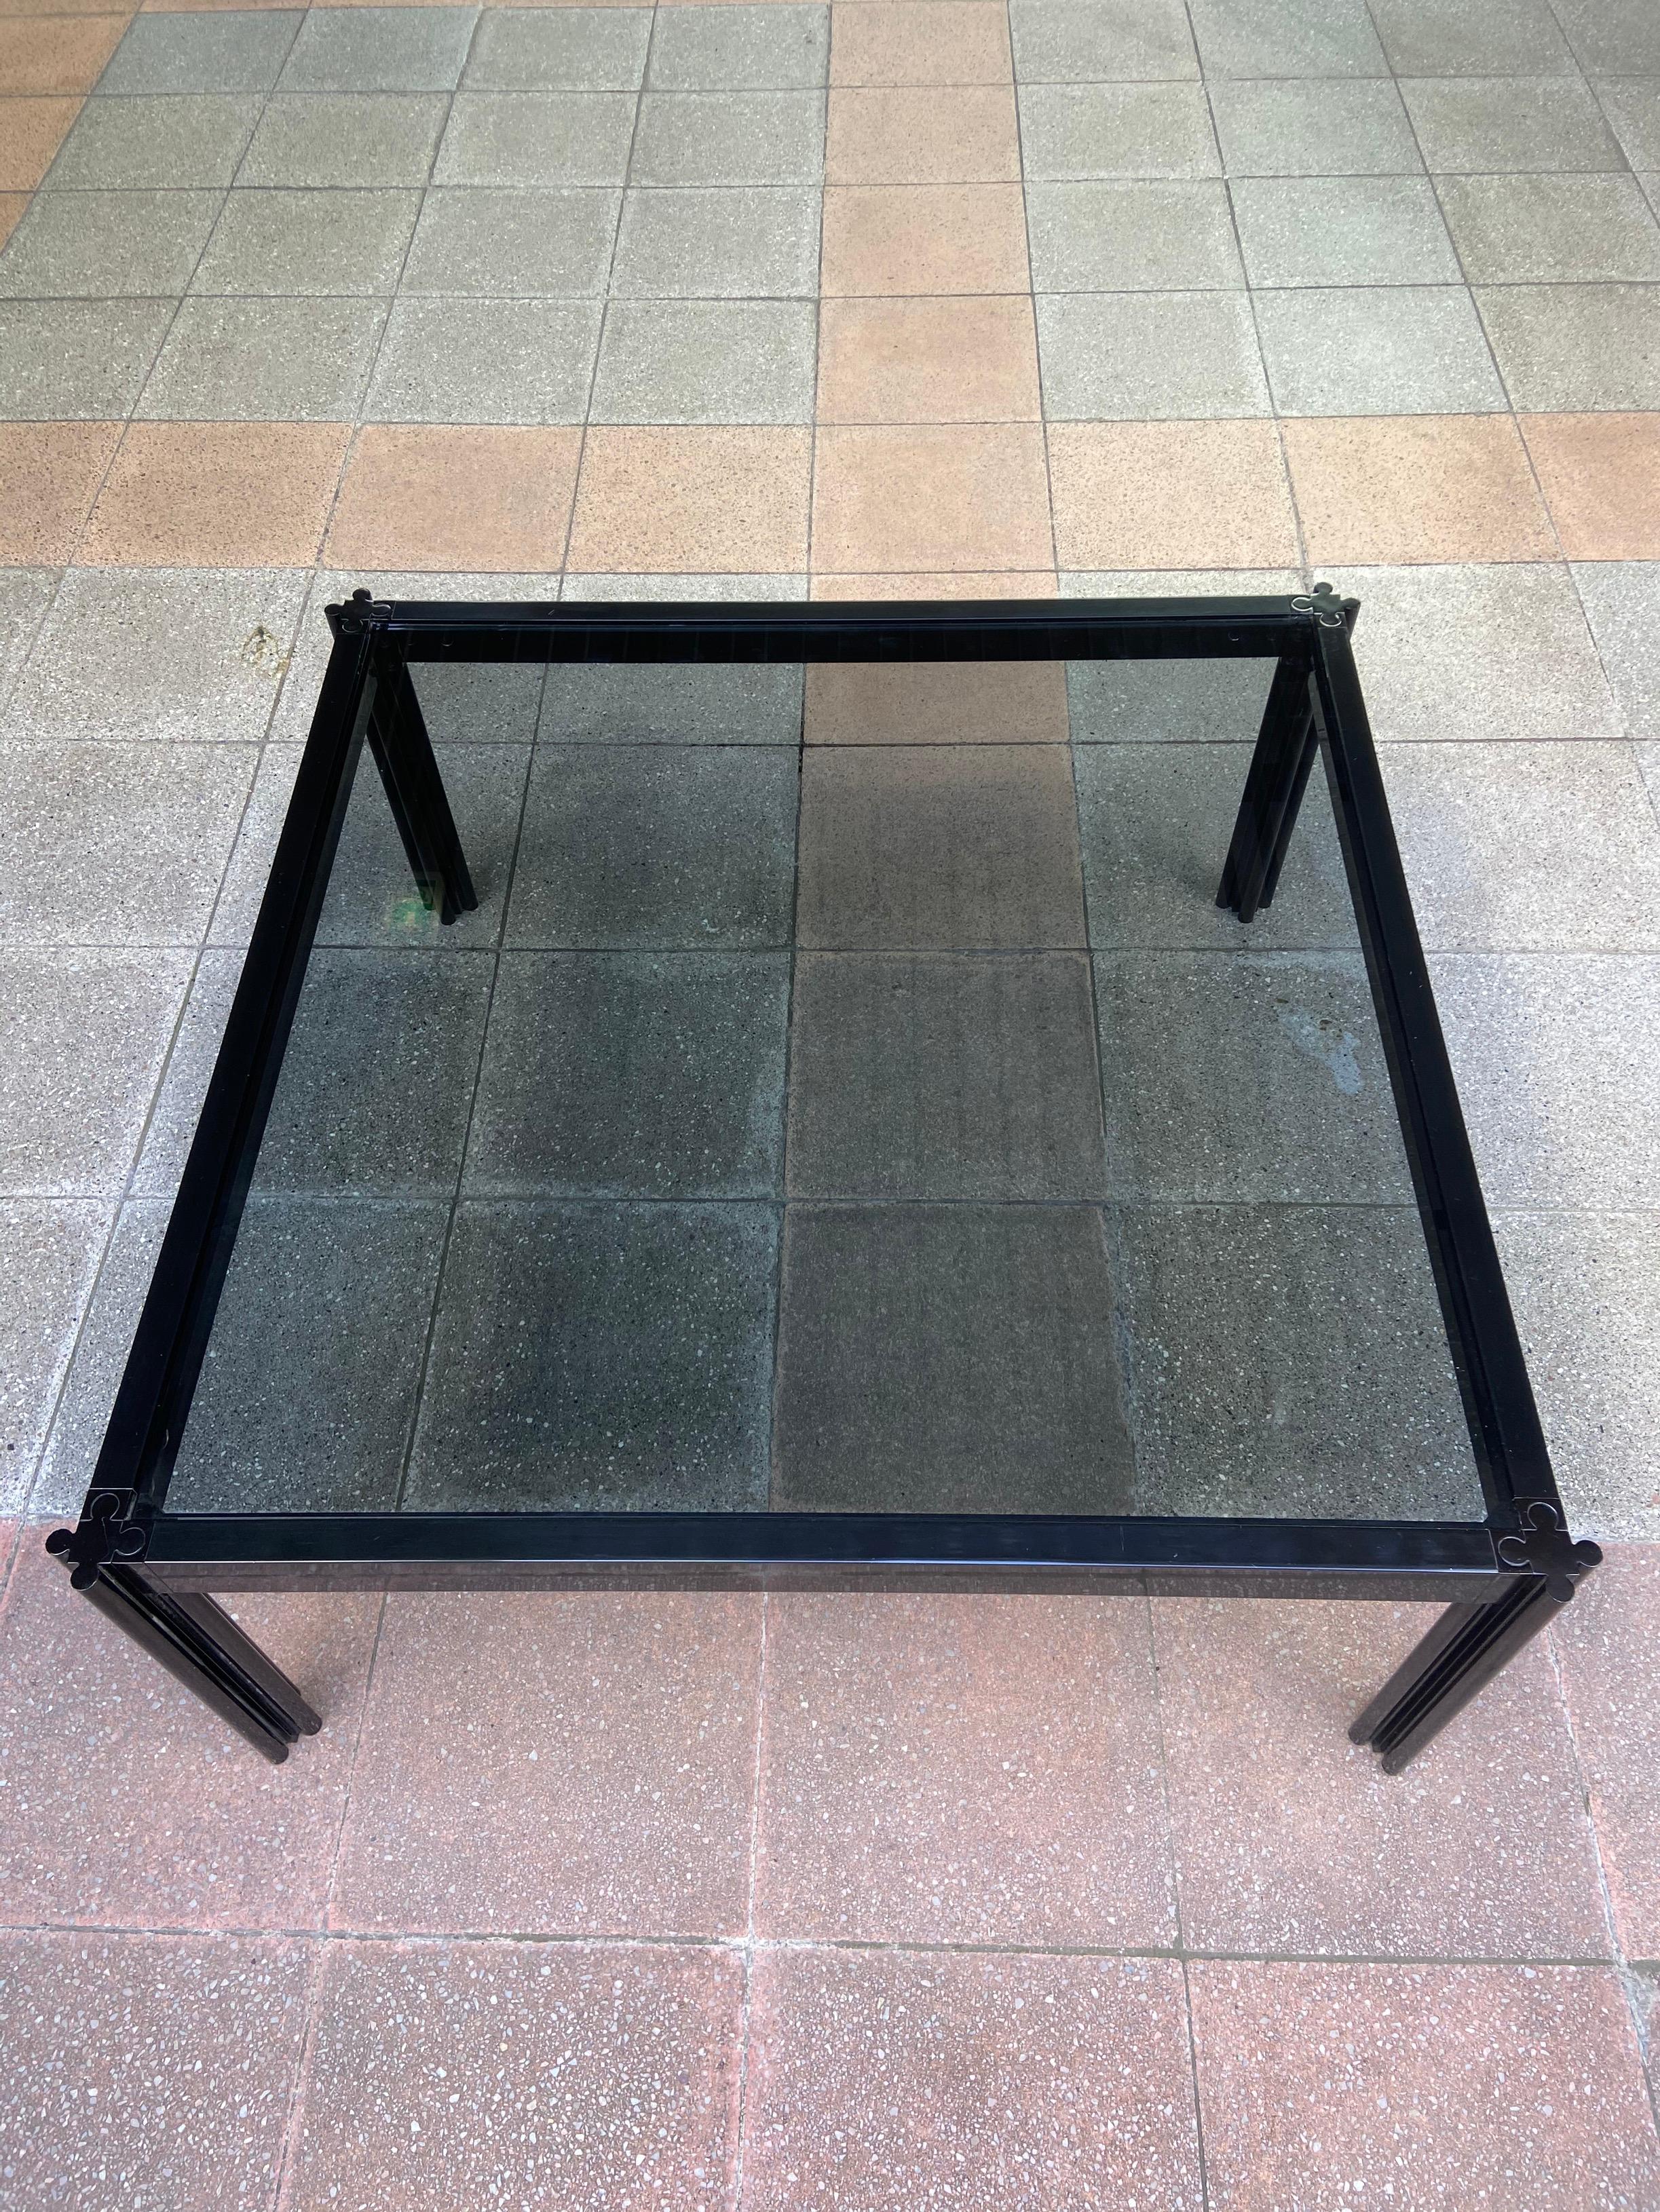 George Ciancimino - Glass table - 1978
Glass & metal
Measures: L 89 x P 89 x H 38 cm. 
 